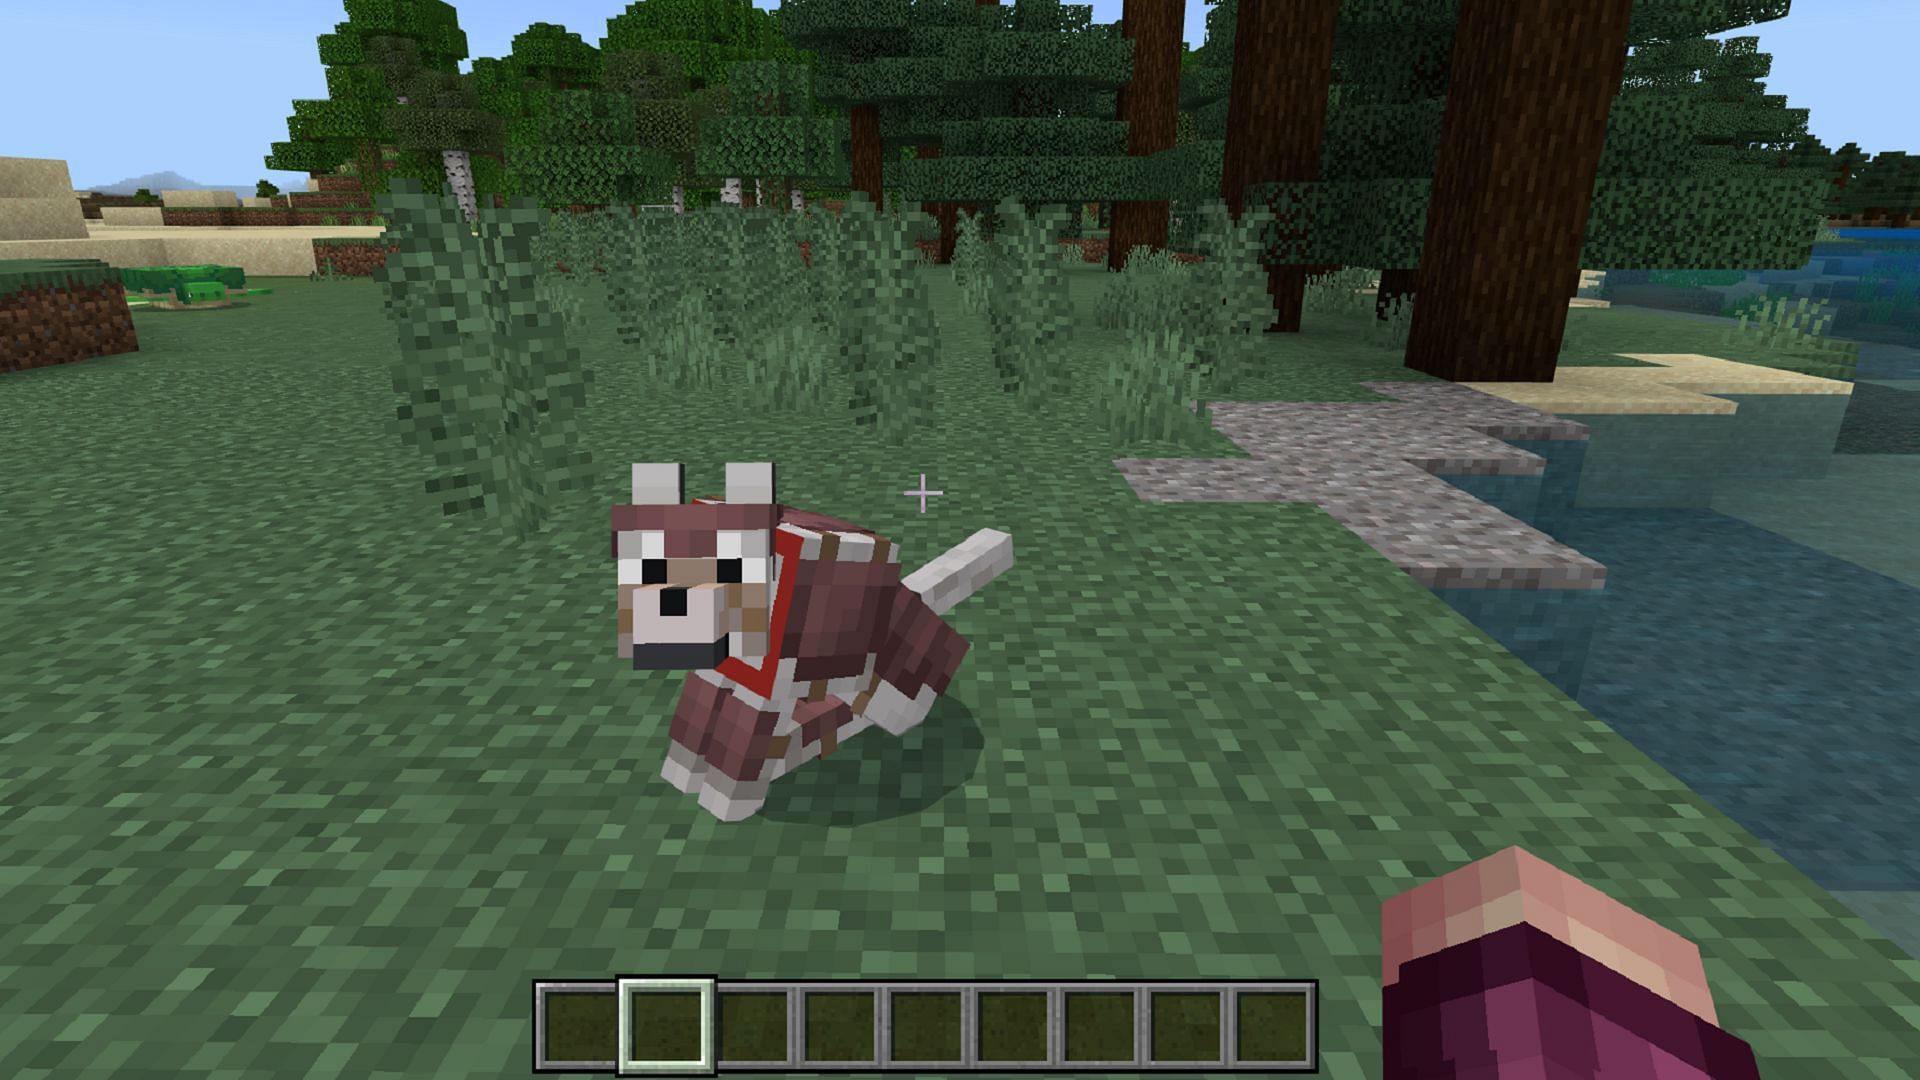 Wolf armor has been made available in Minecraft Bedrock